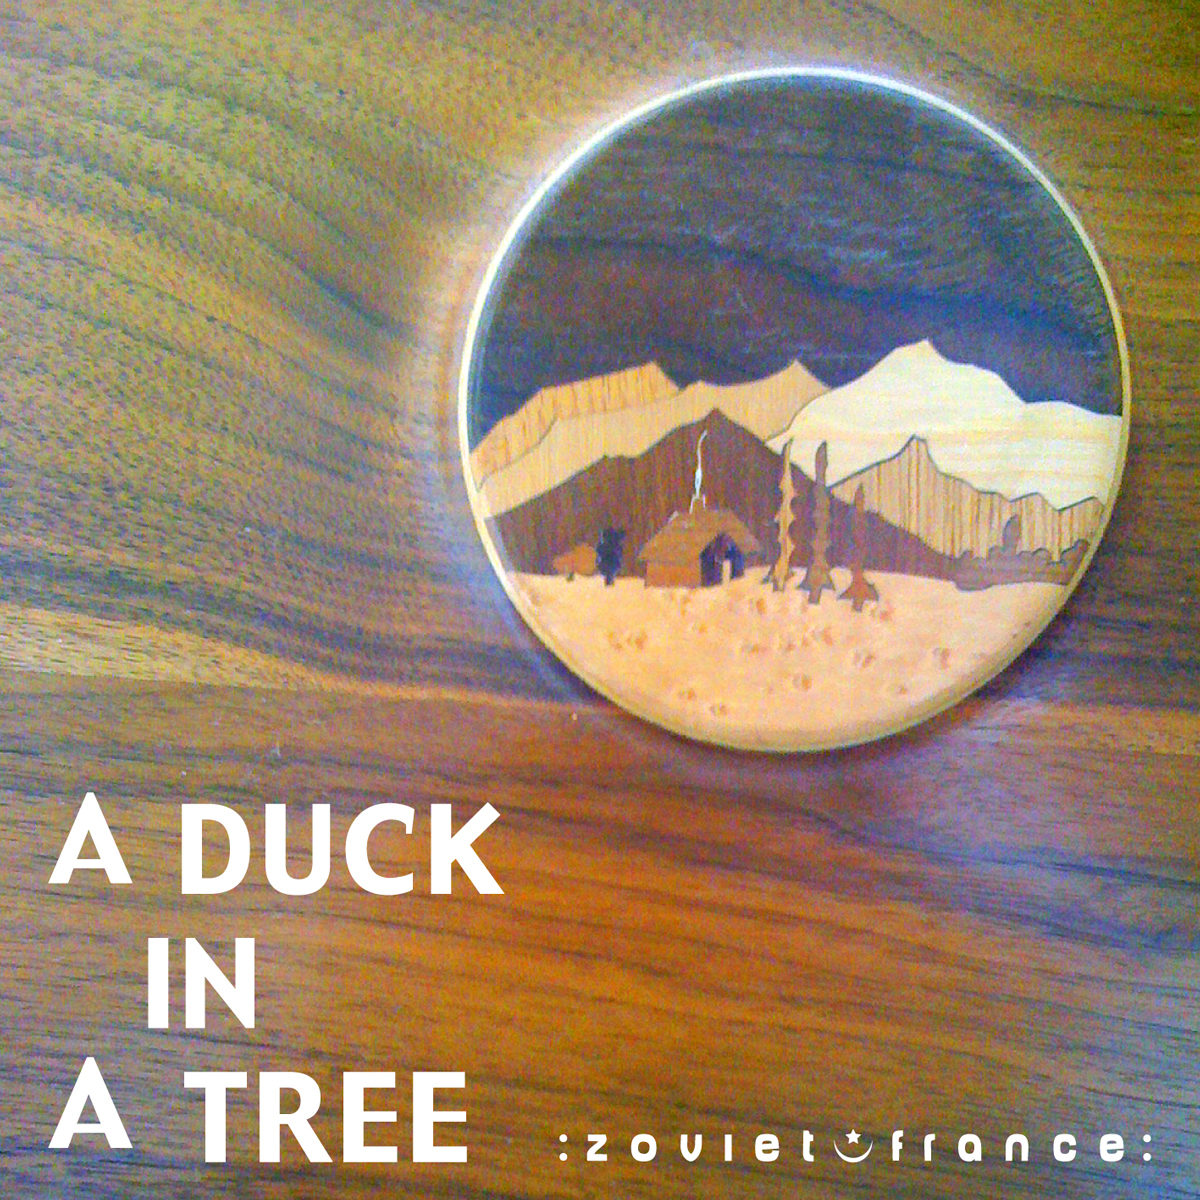 A-Duck-in-a-Tree-2012-09-08-_-Near-Away-and-Further-to-Far-layout.jpg